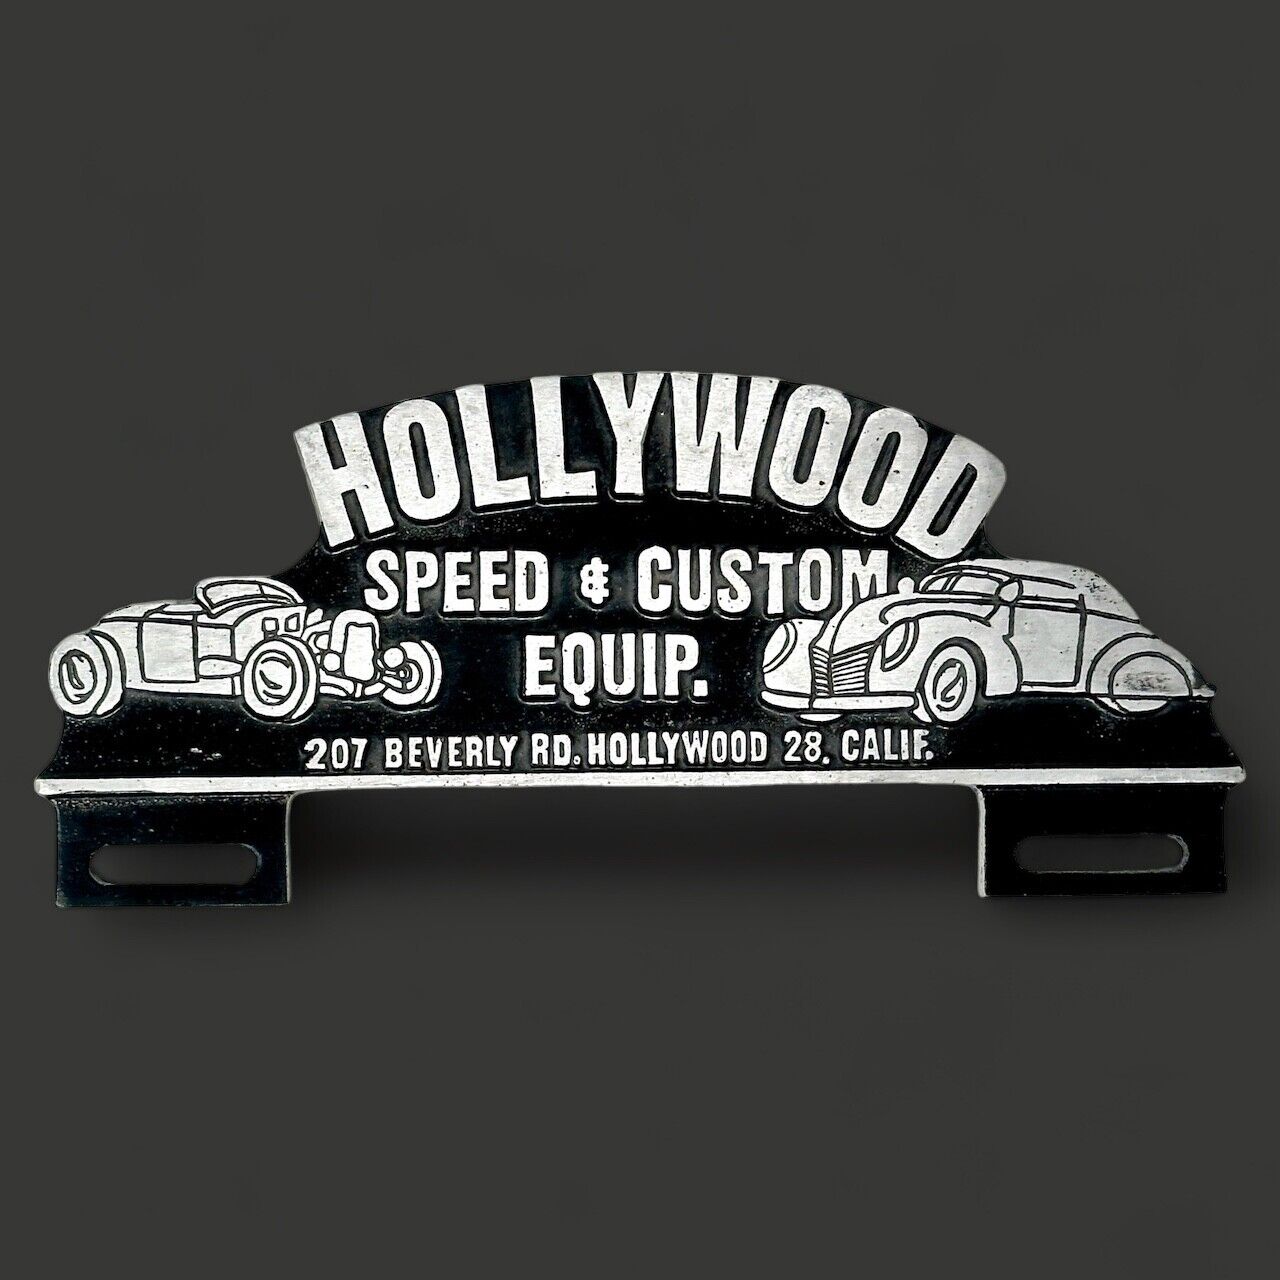 Hollywood Speed & Custom Equip. Car License Plate FOB Topper With Vintage Design